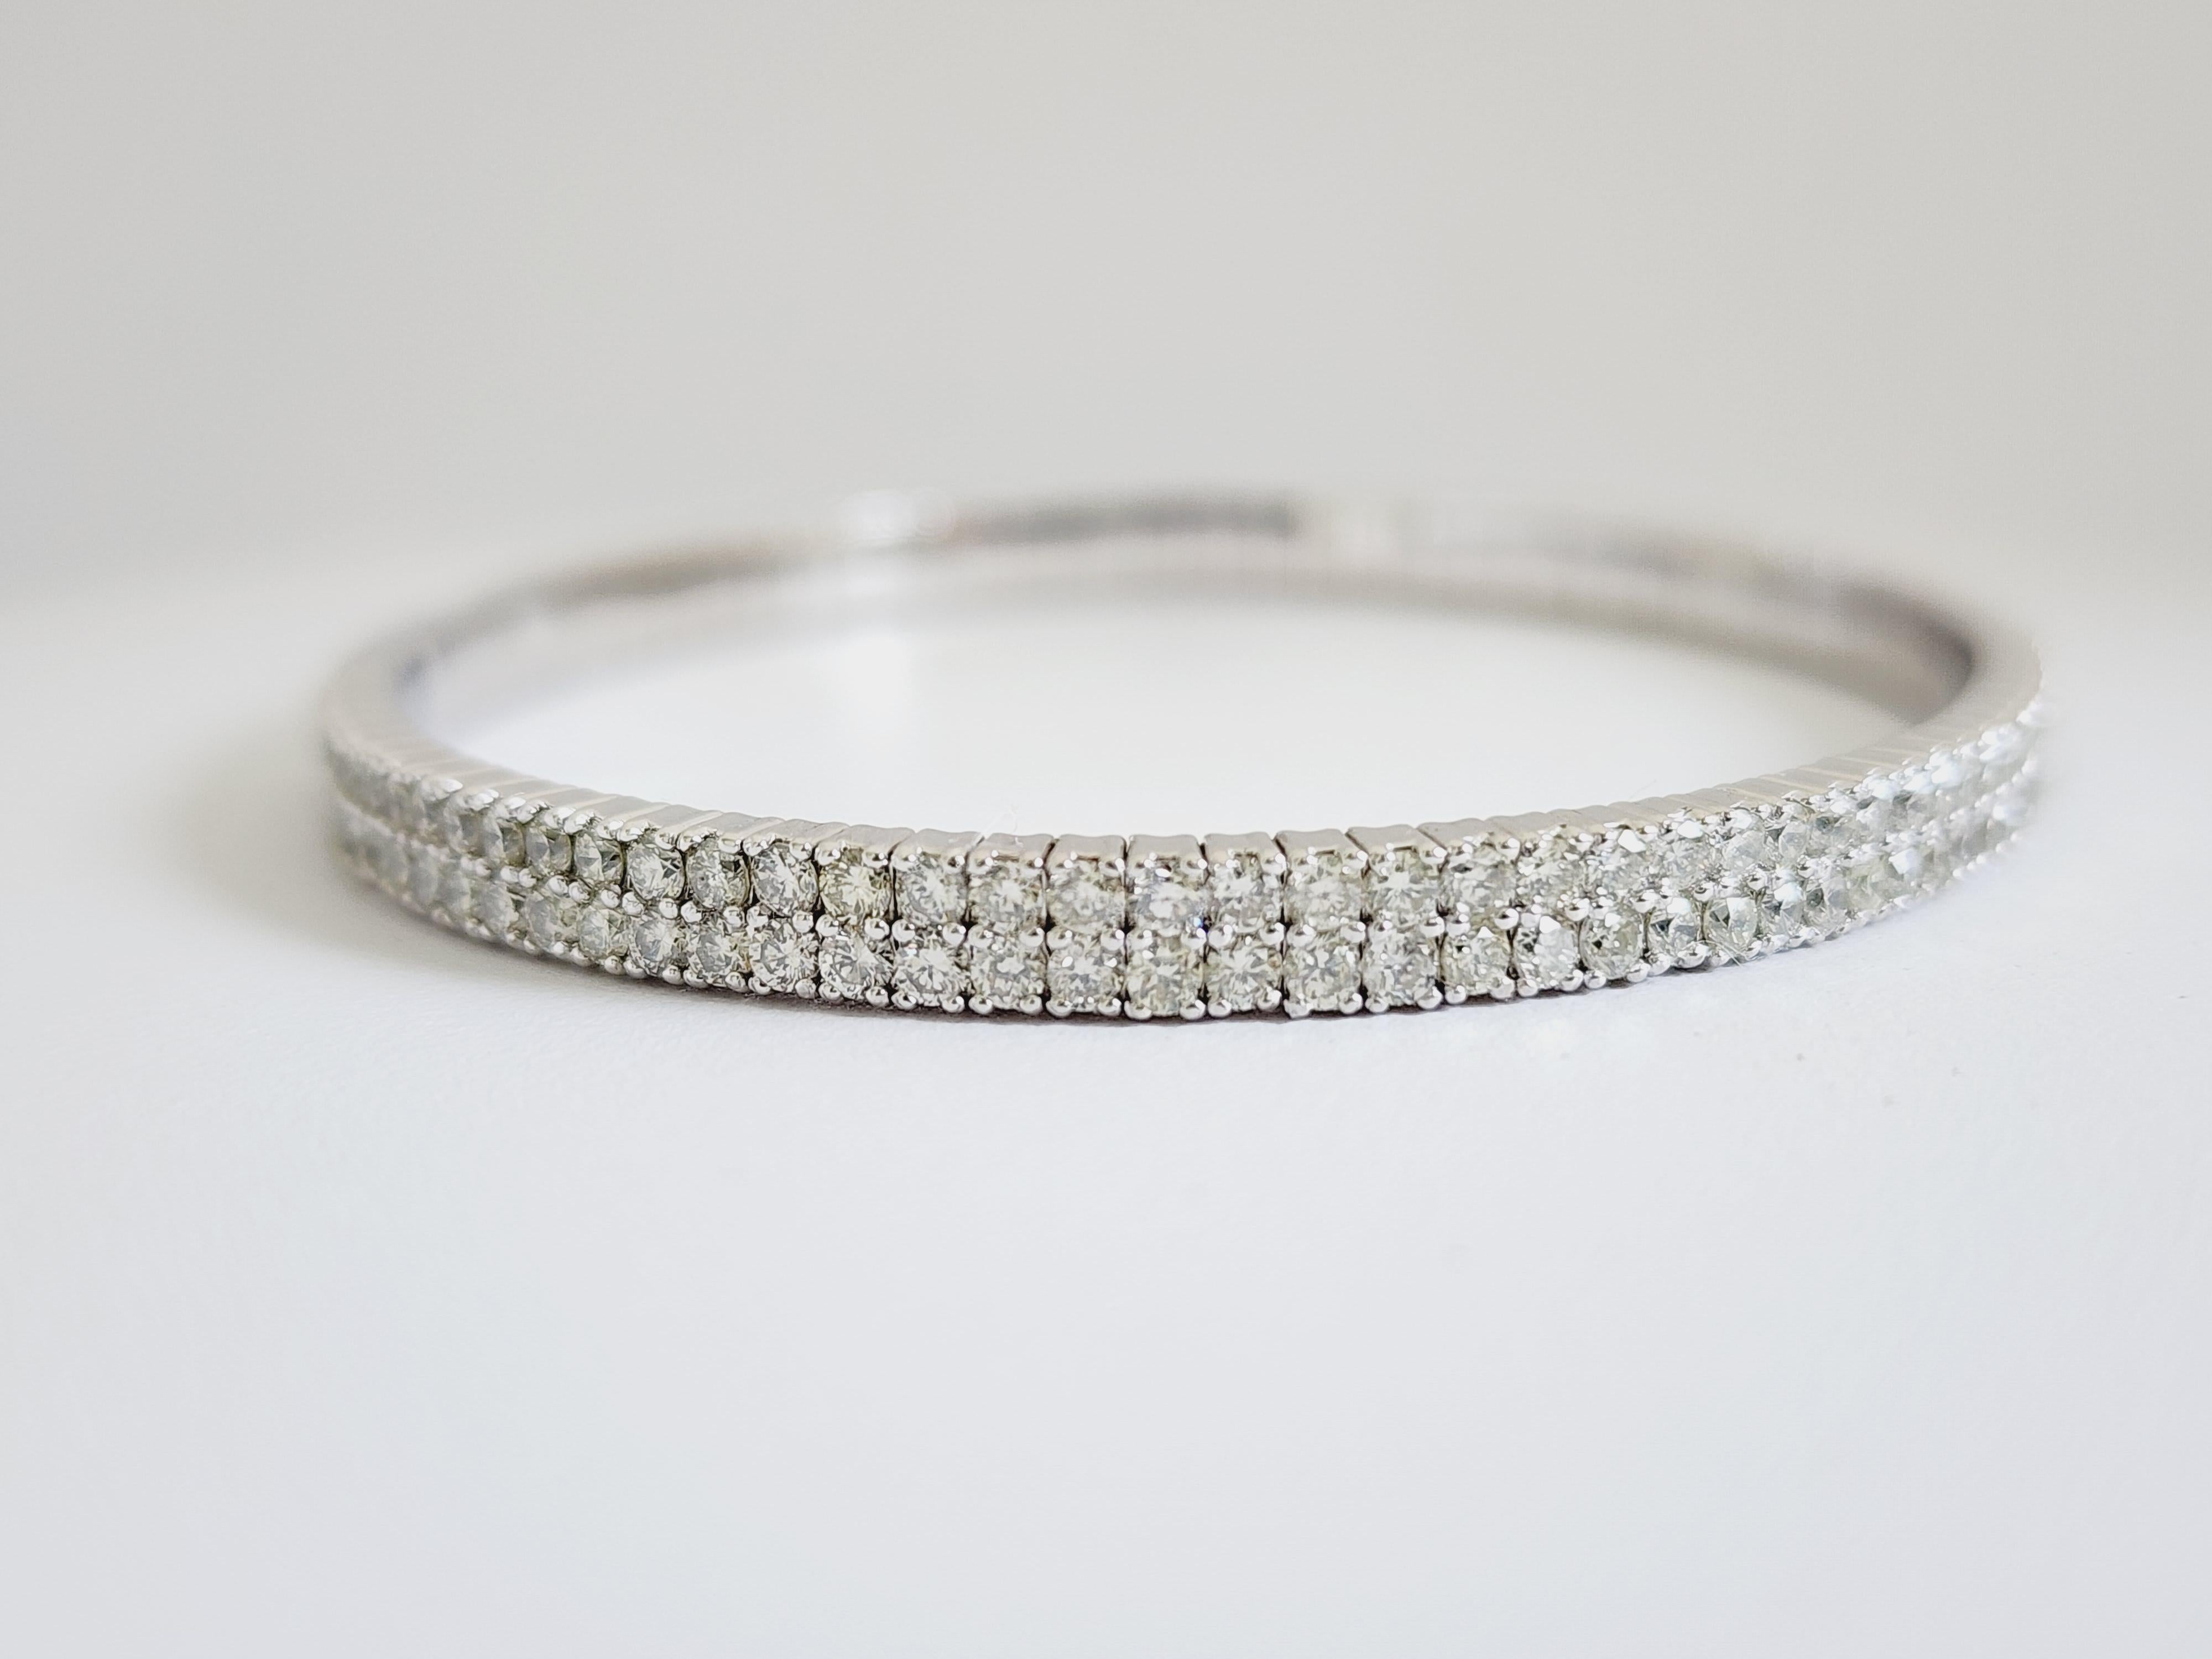 4.82 Carat Double Row Flexible Bangle White Gold 14 Karat Bracelet In New Condition For Sale In Great Neck, NY